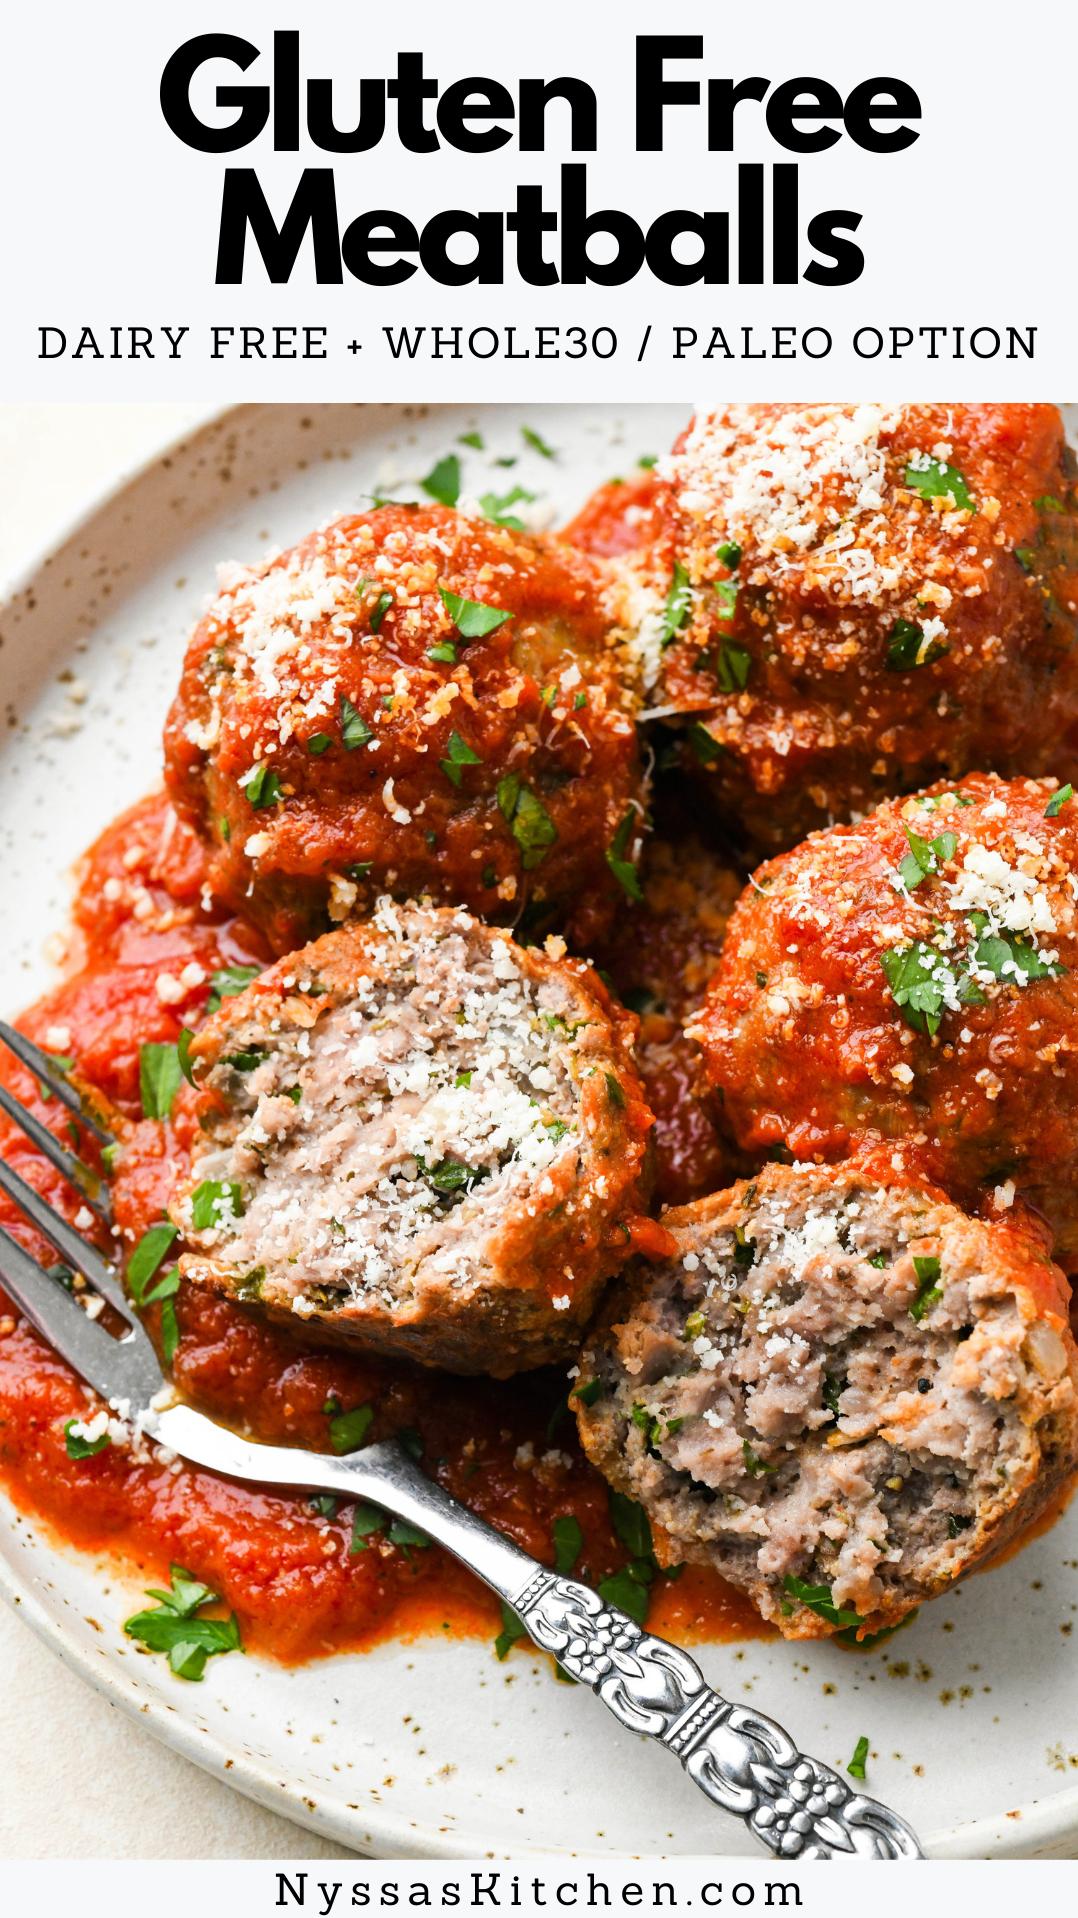  Who knew meatballs could be cooked in the microwave?